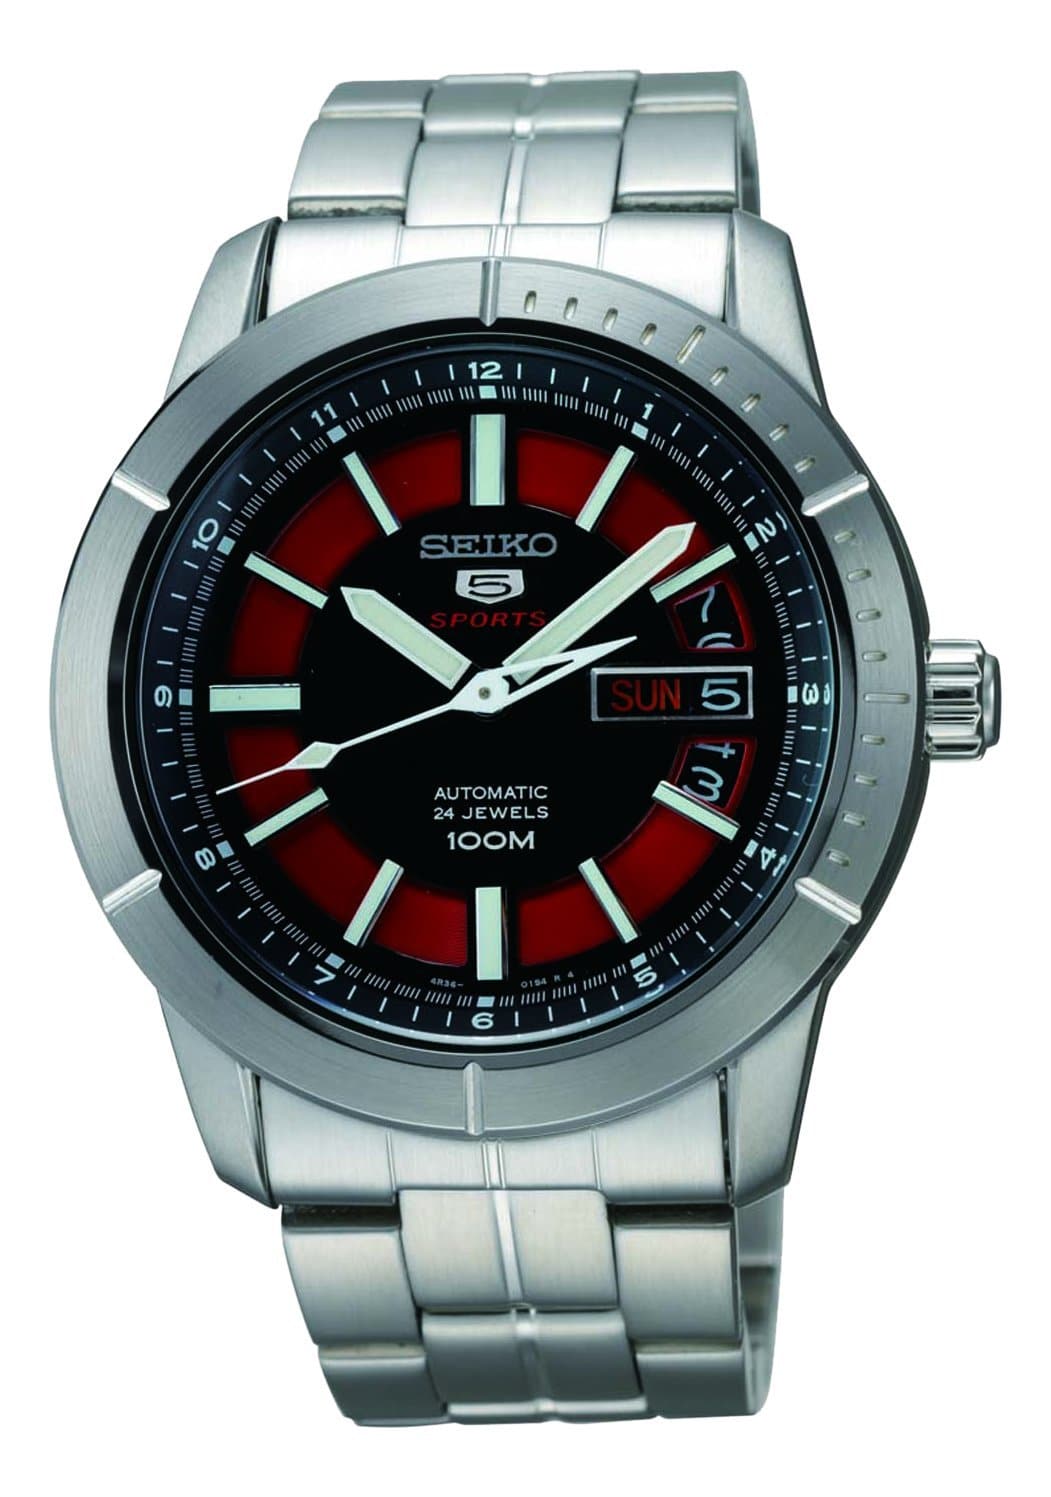 Seiko 5 Sports 100M Automatic Men's Watch Black with Red Dial SRP339K1 - Diligence1International